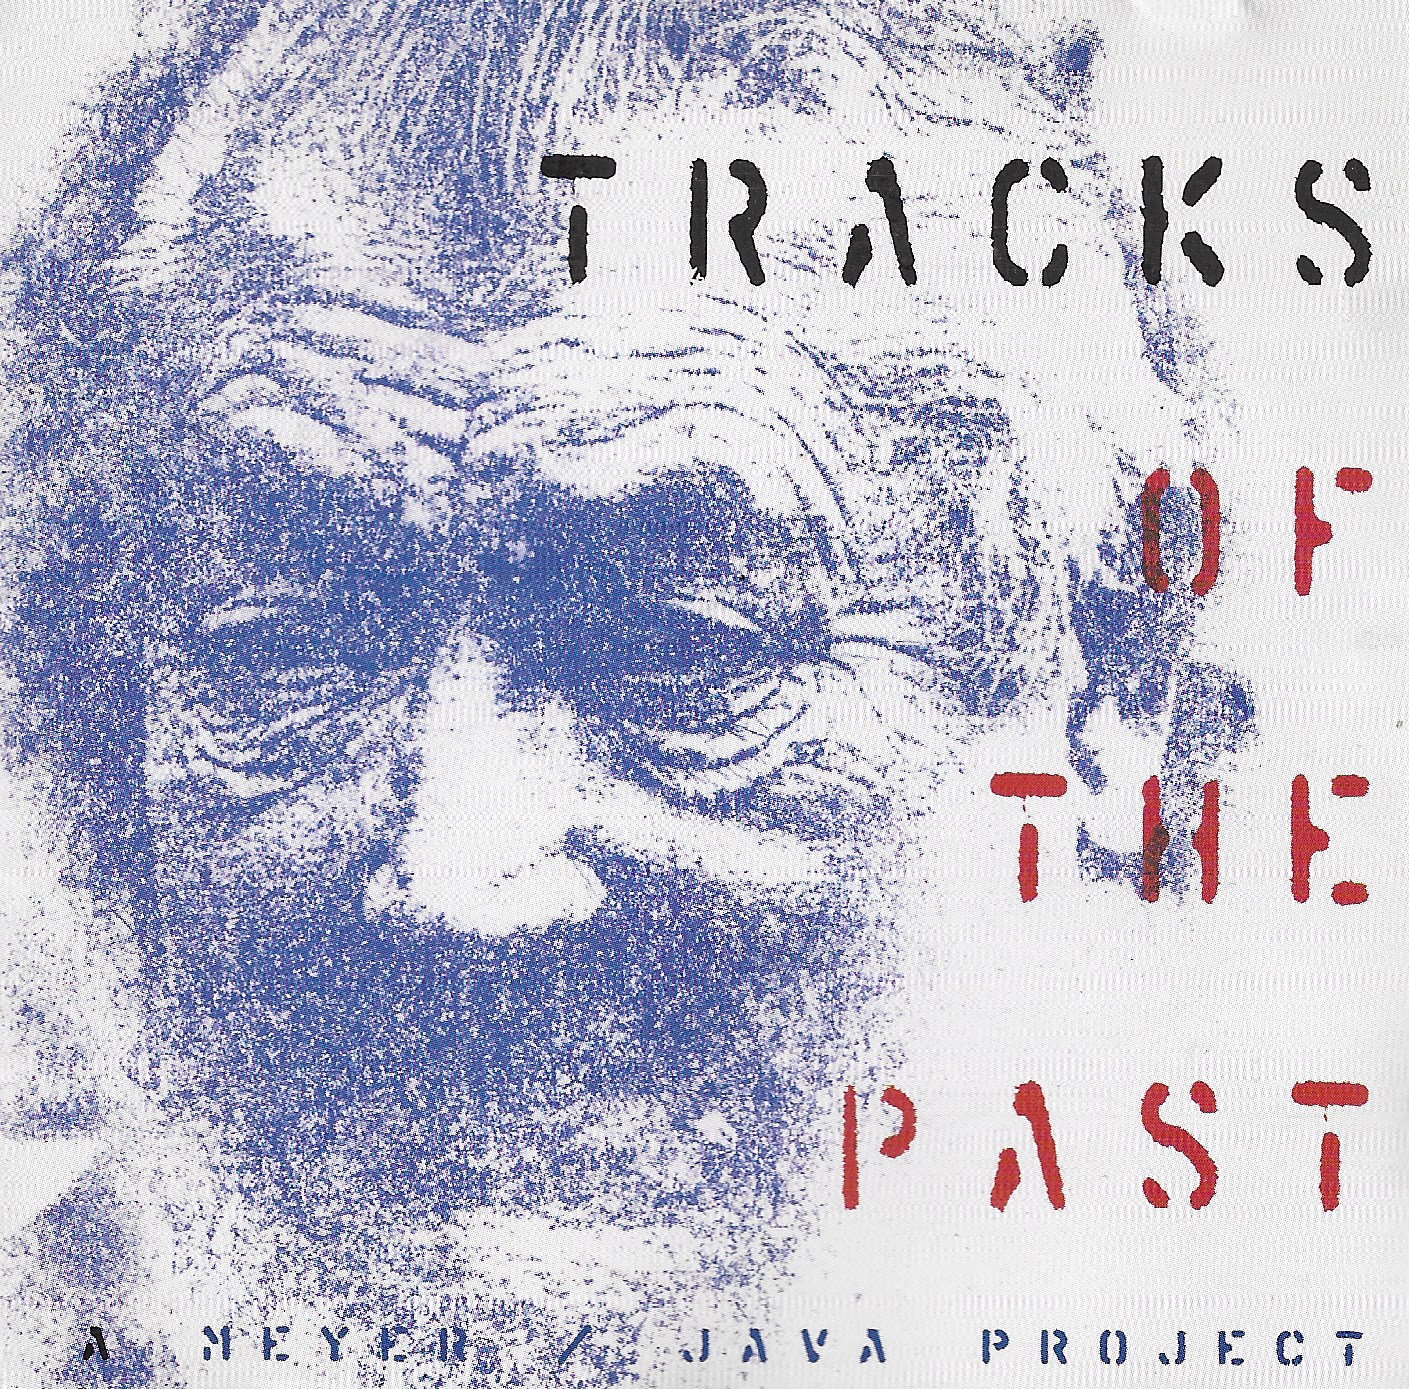 Tracks of the past